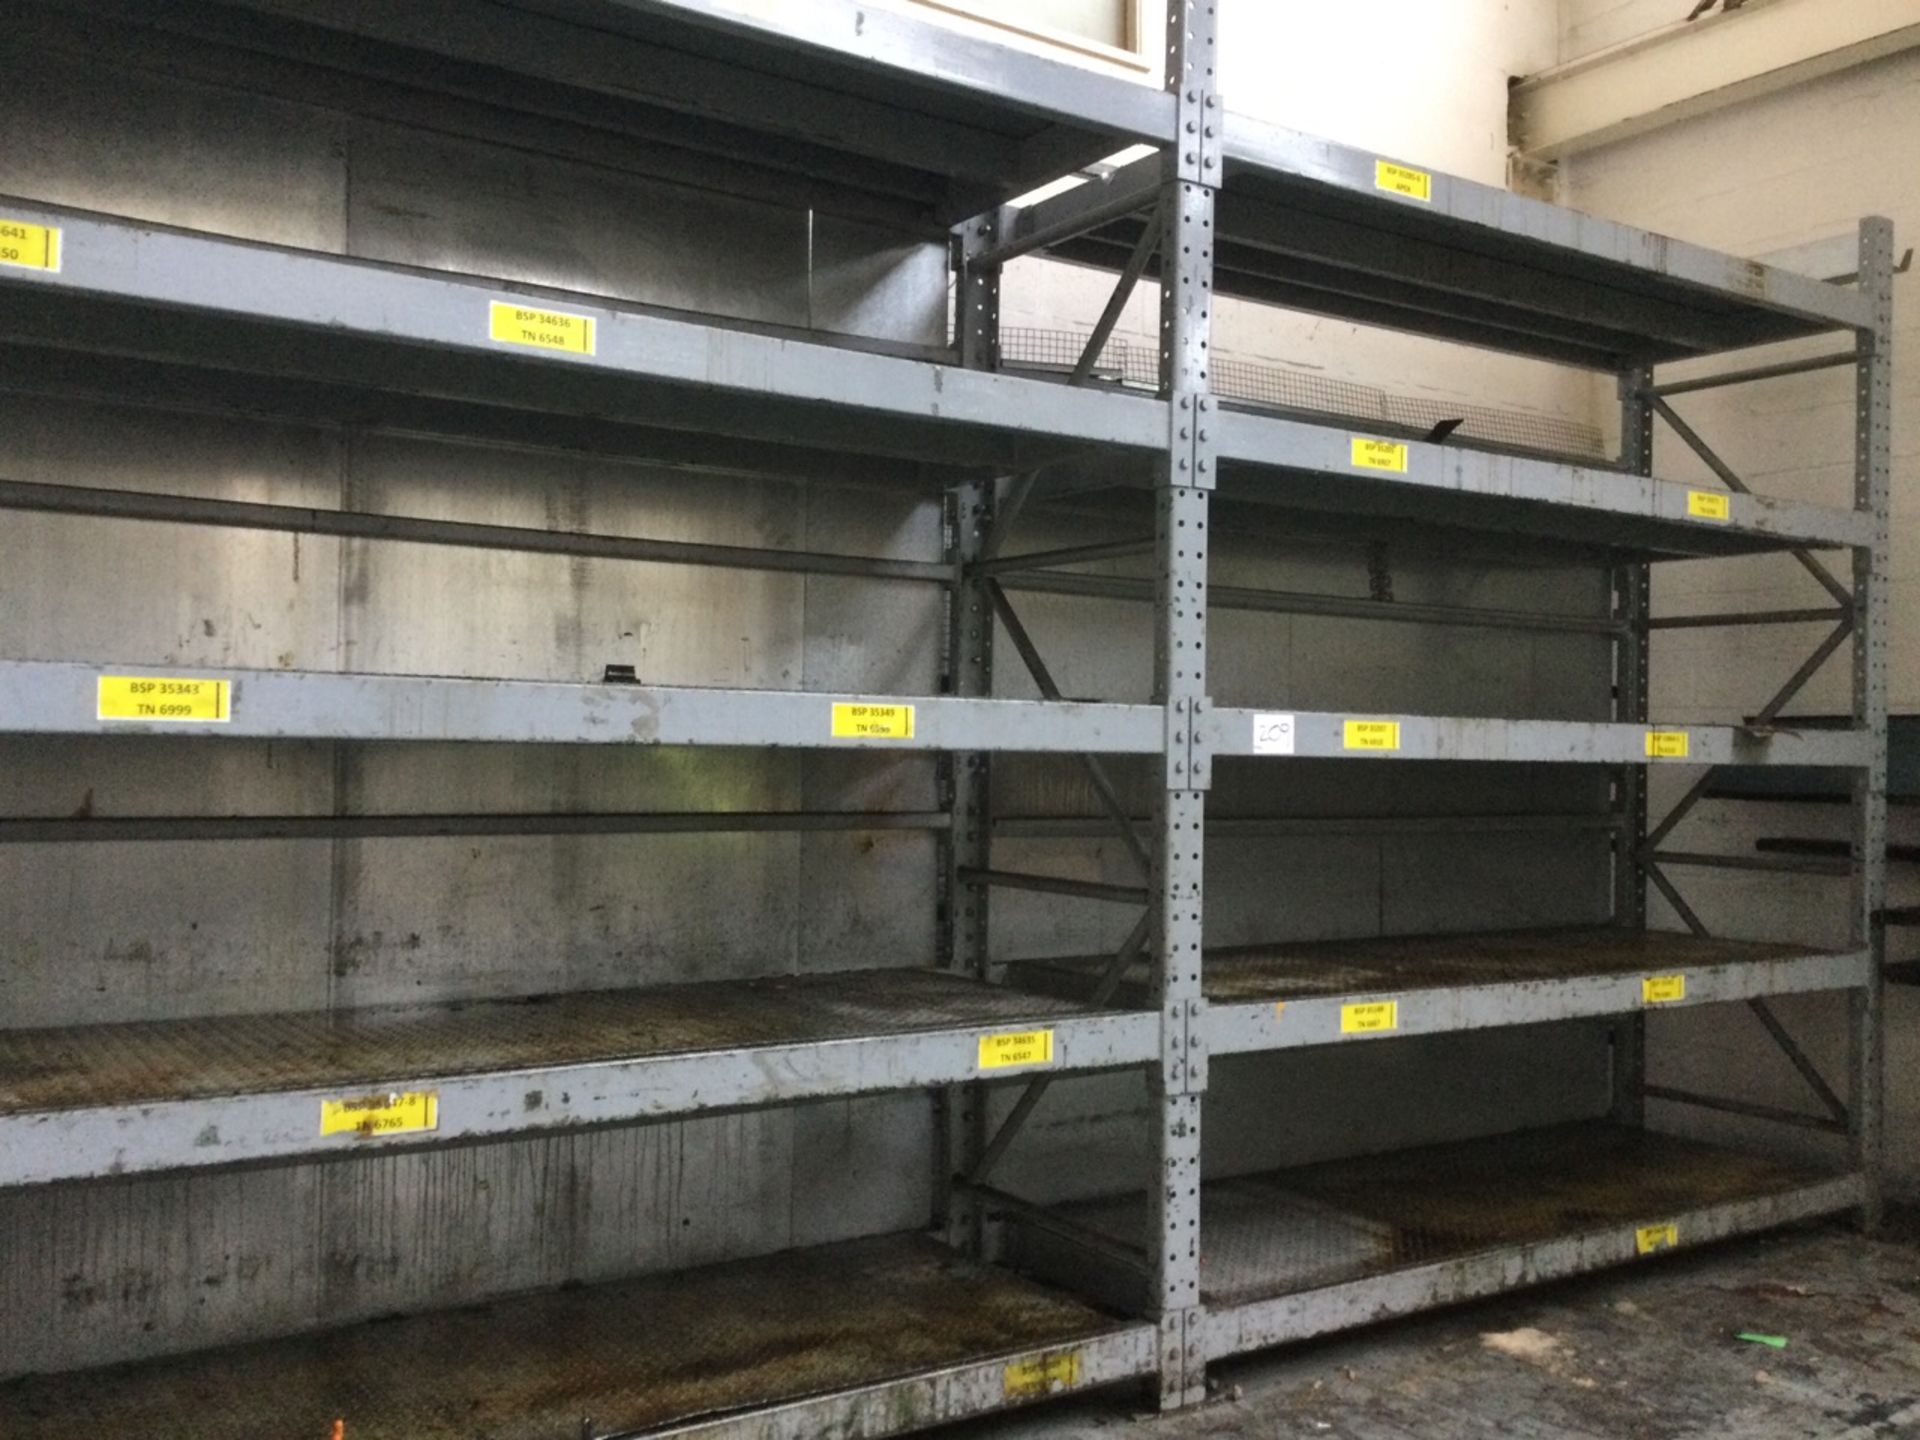 1, 2 Bays Of Heavy Duty Racking Comprising - 3 Upright Frames, Approx 3.5m - 10 Shelves